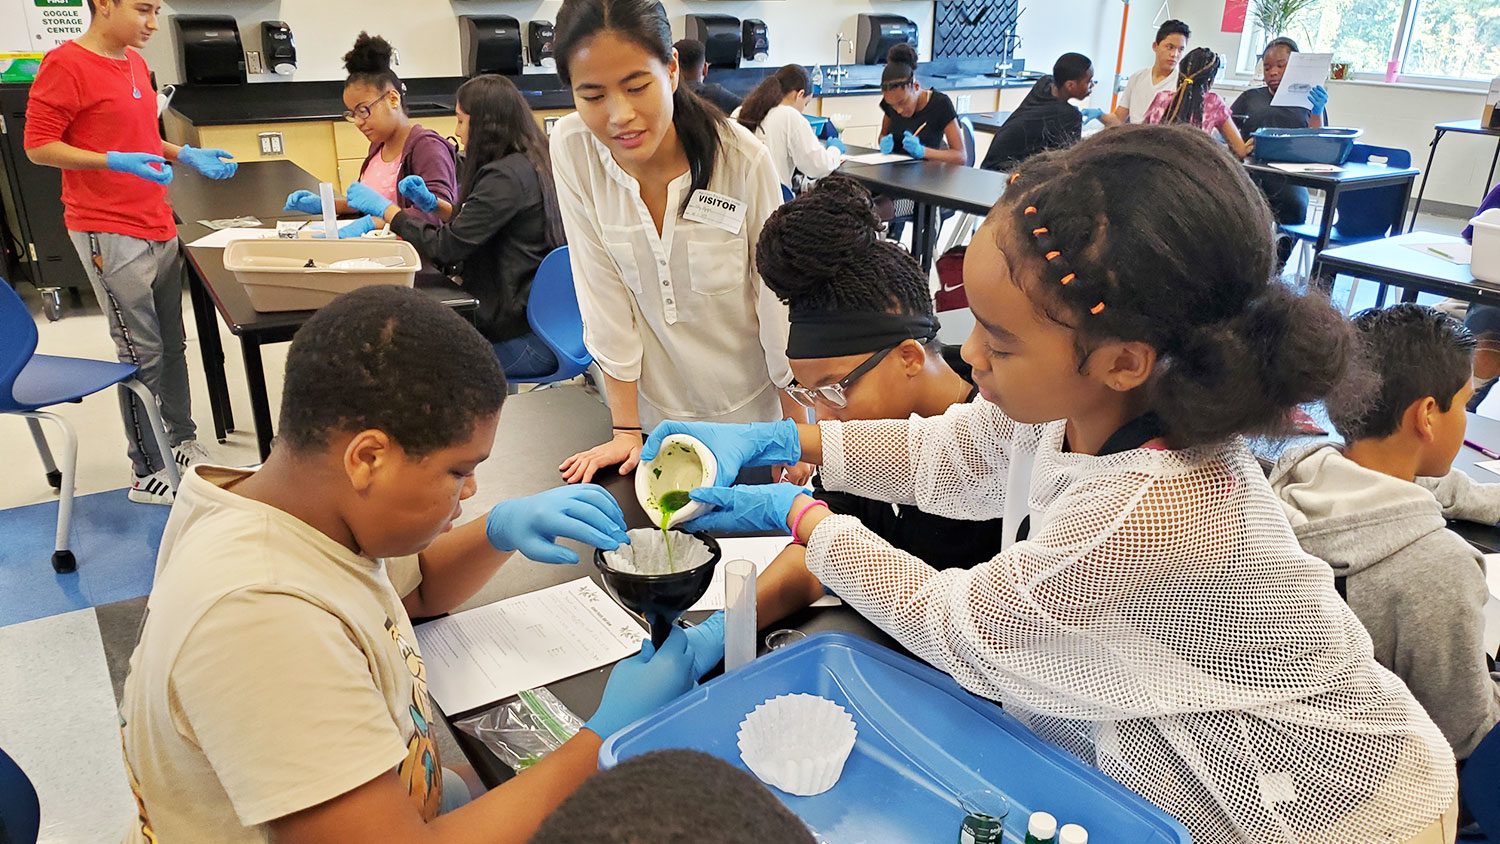 Students conduct an experiment